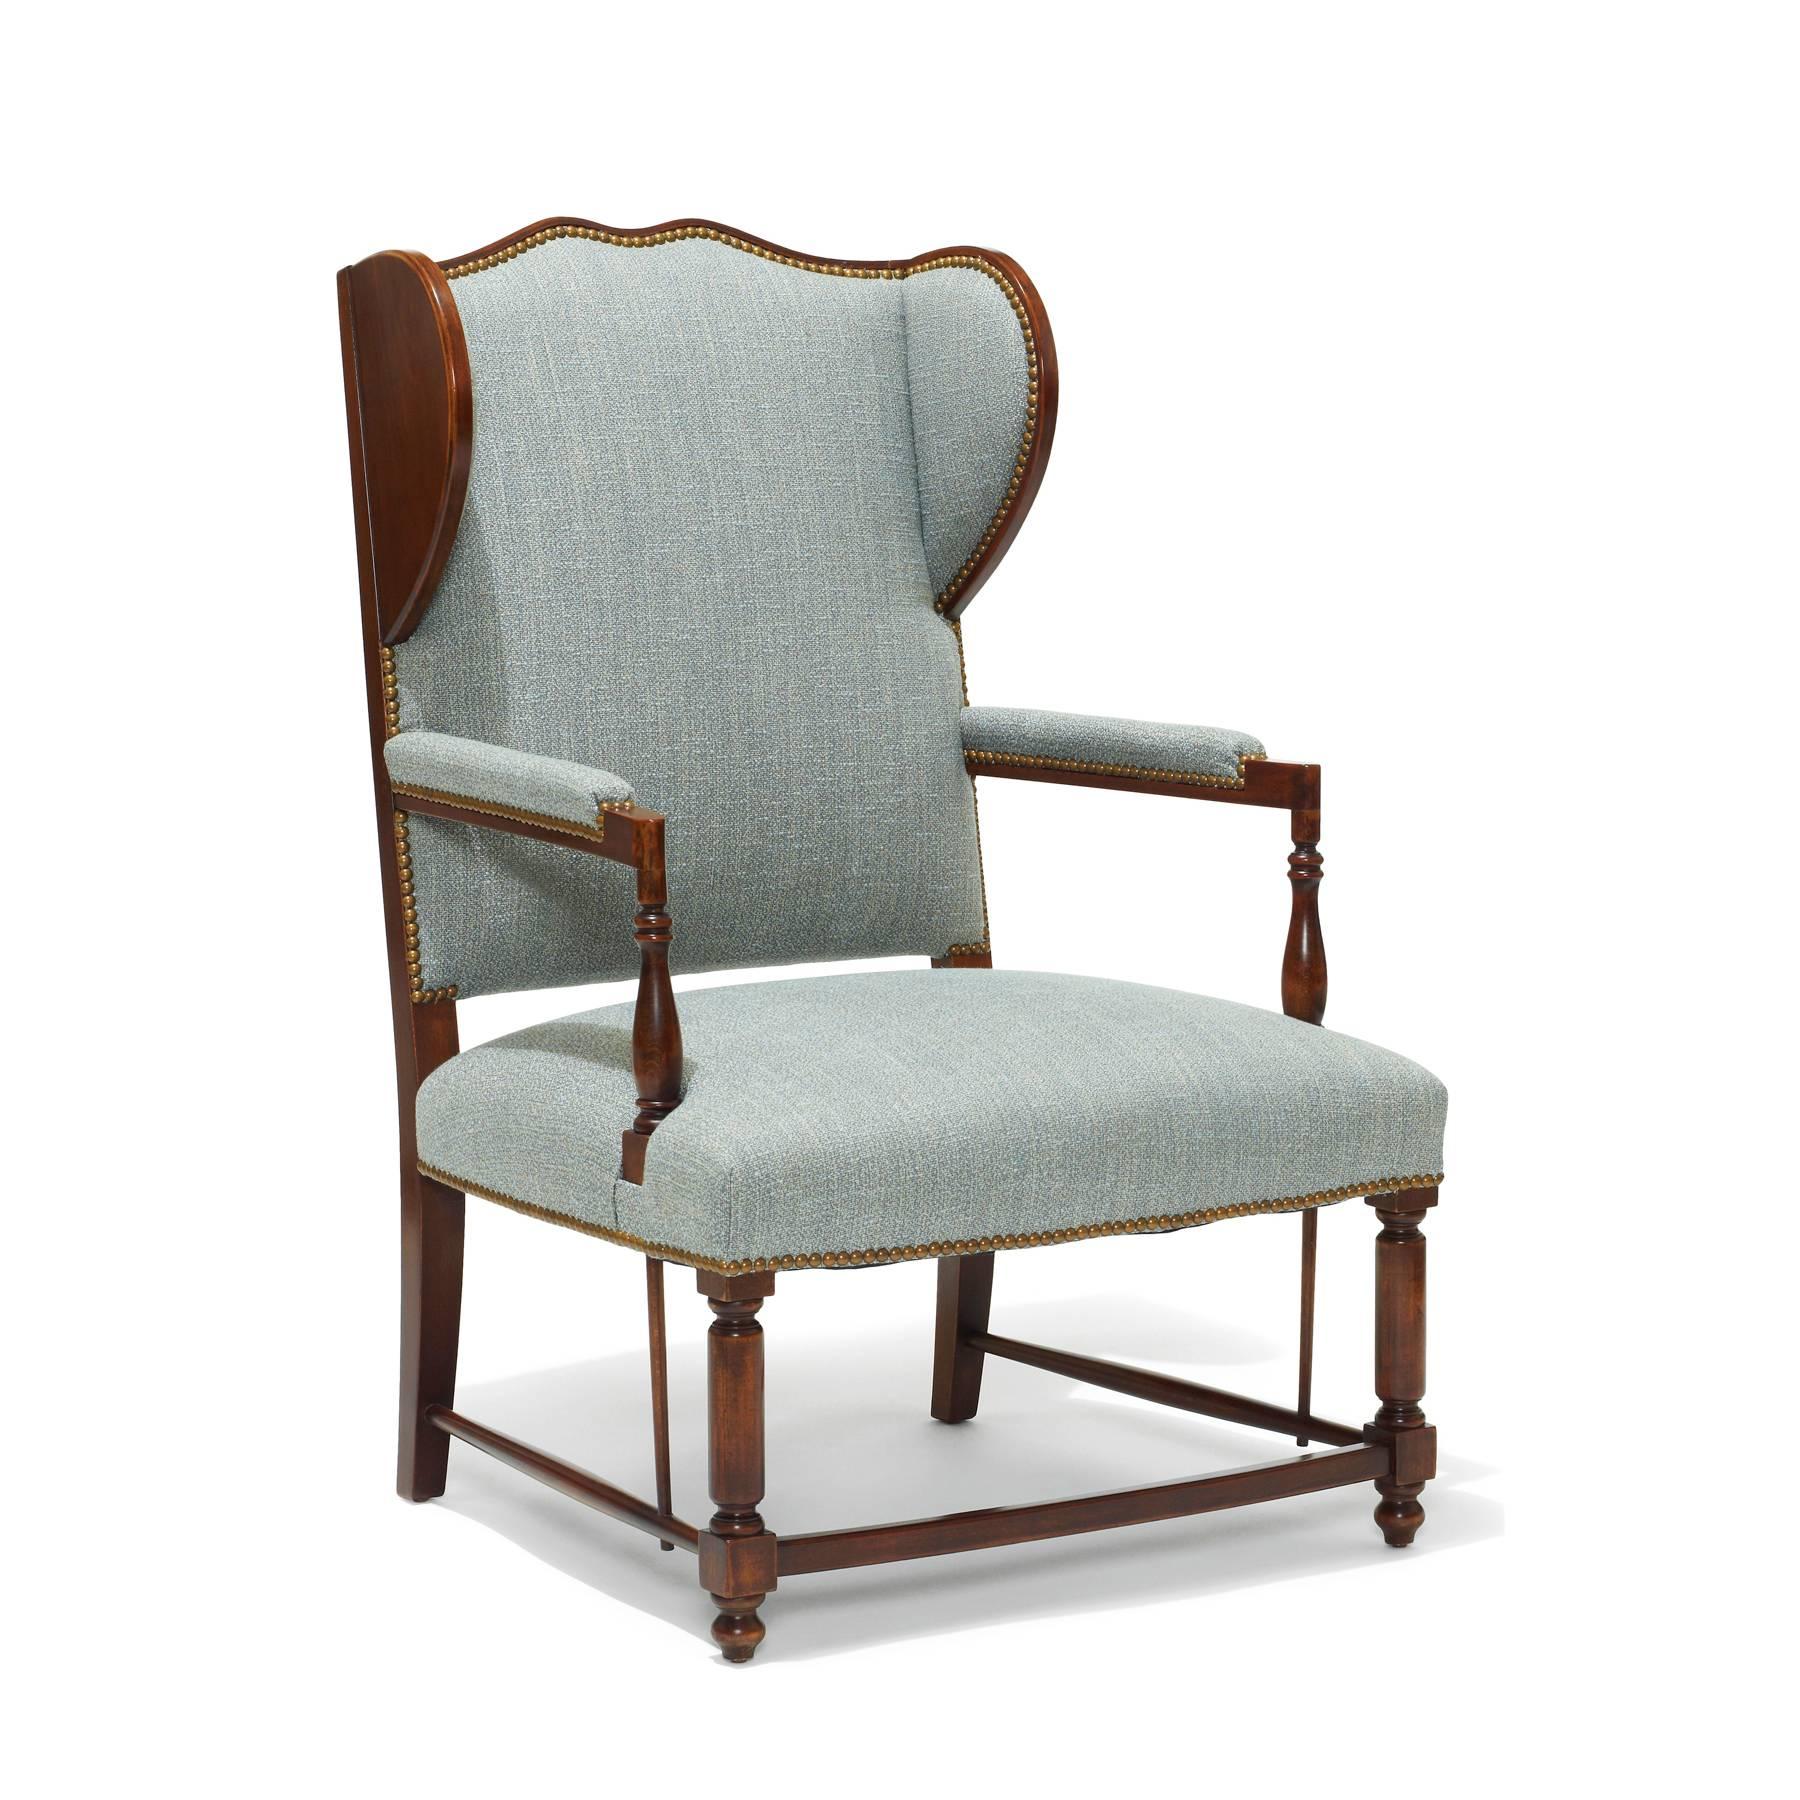 A most handsome pair of Swedish Art Deco reinterpretations of traditional winged back armchairs, having exposed stained birch frames with turned detailing and wooden backed wings adding a sense of structure, warmth, and vernacular charm. The birch